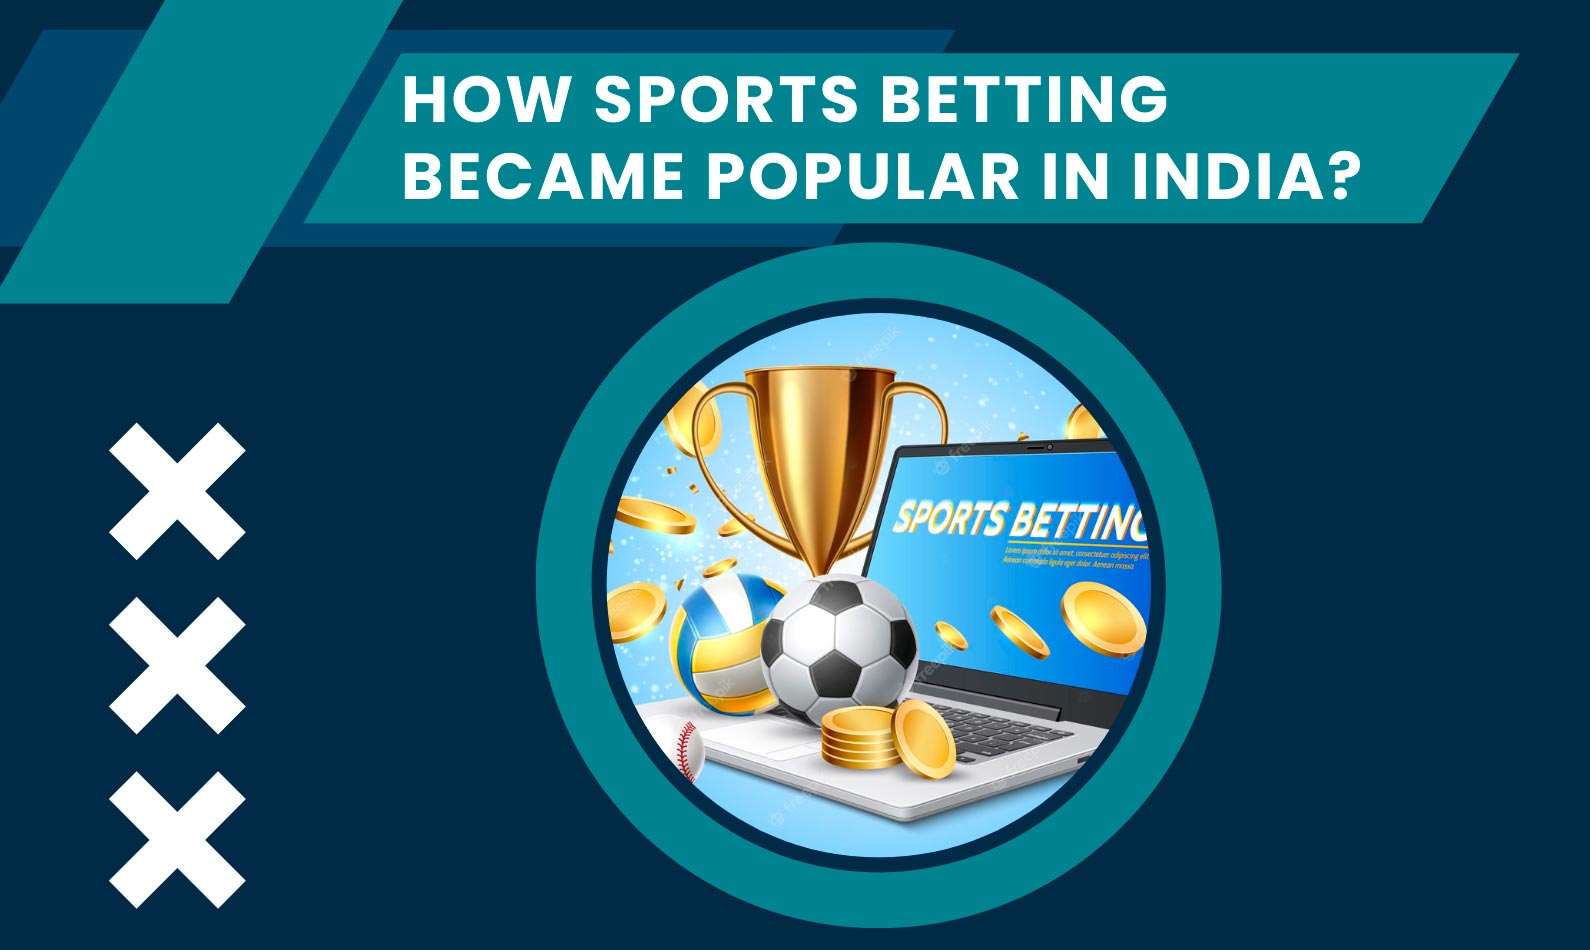 How sports betting became popular in India?